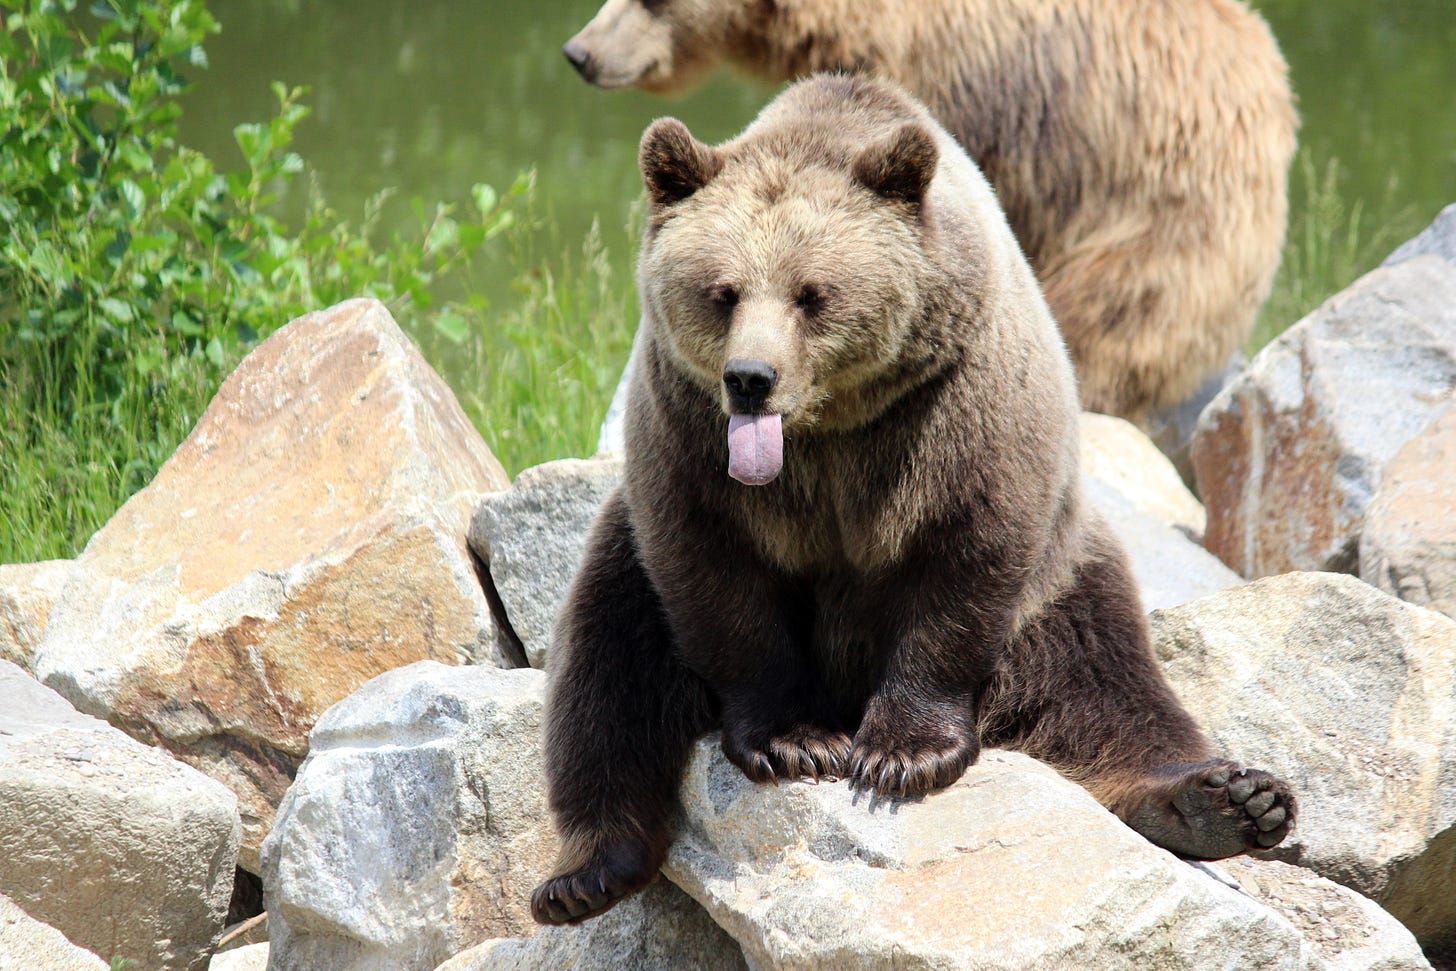 A grizzly bear sitting on a bolder with their tongue sticking out